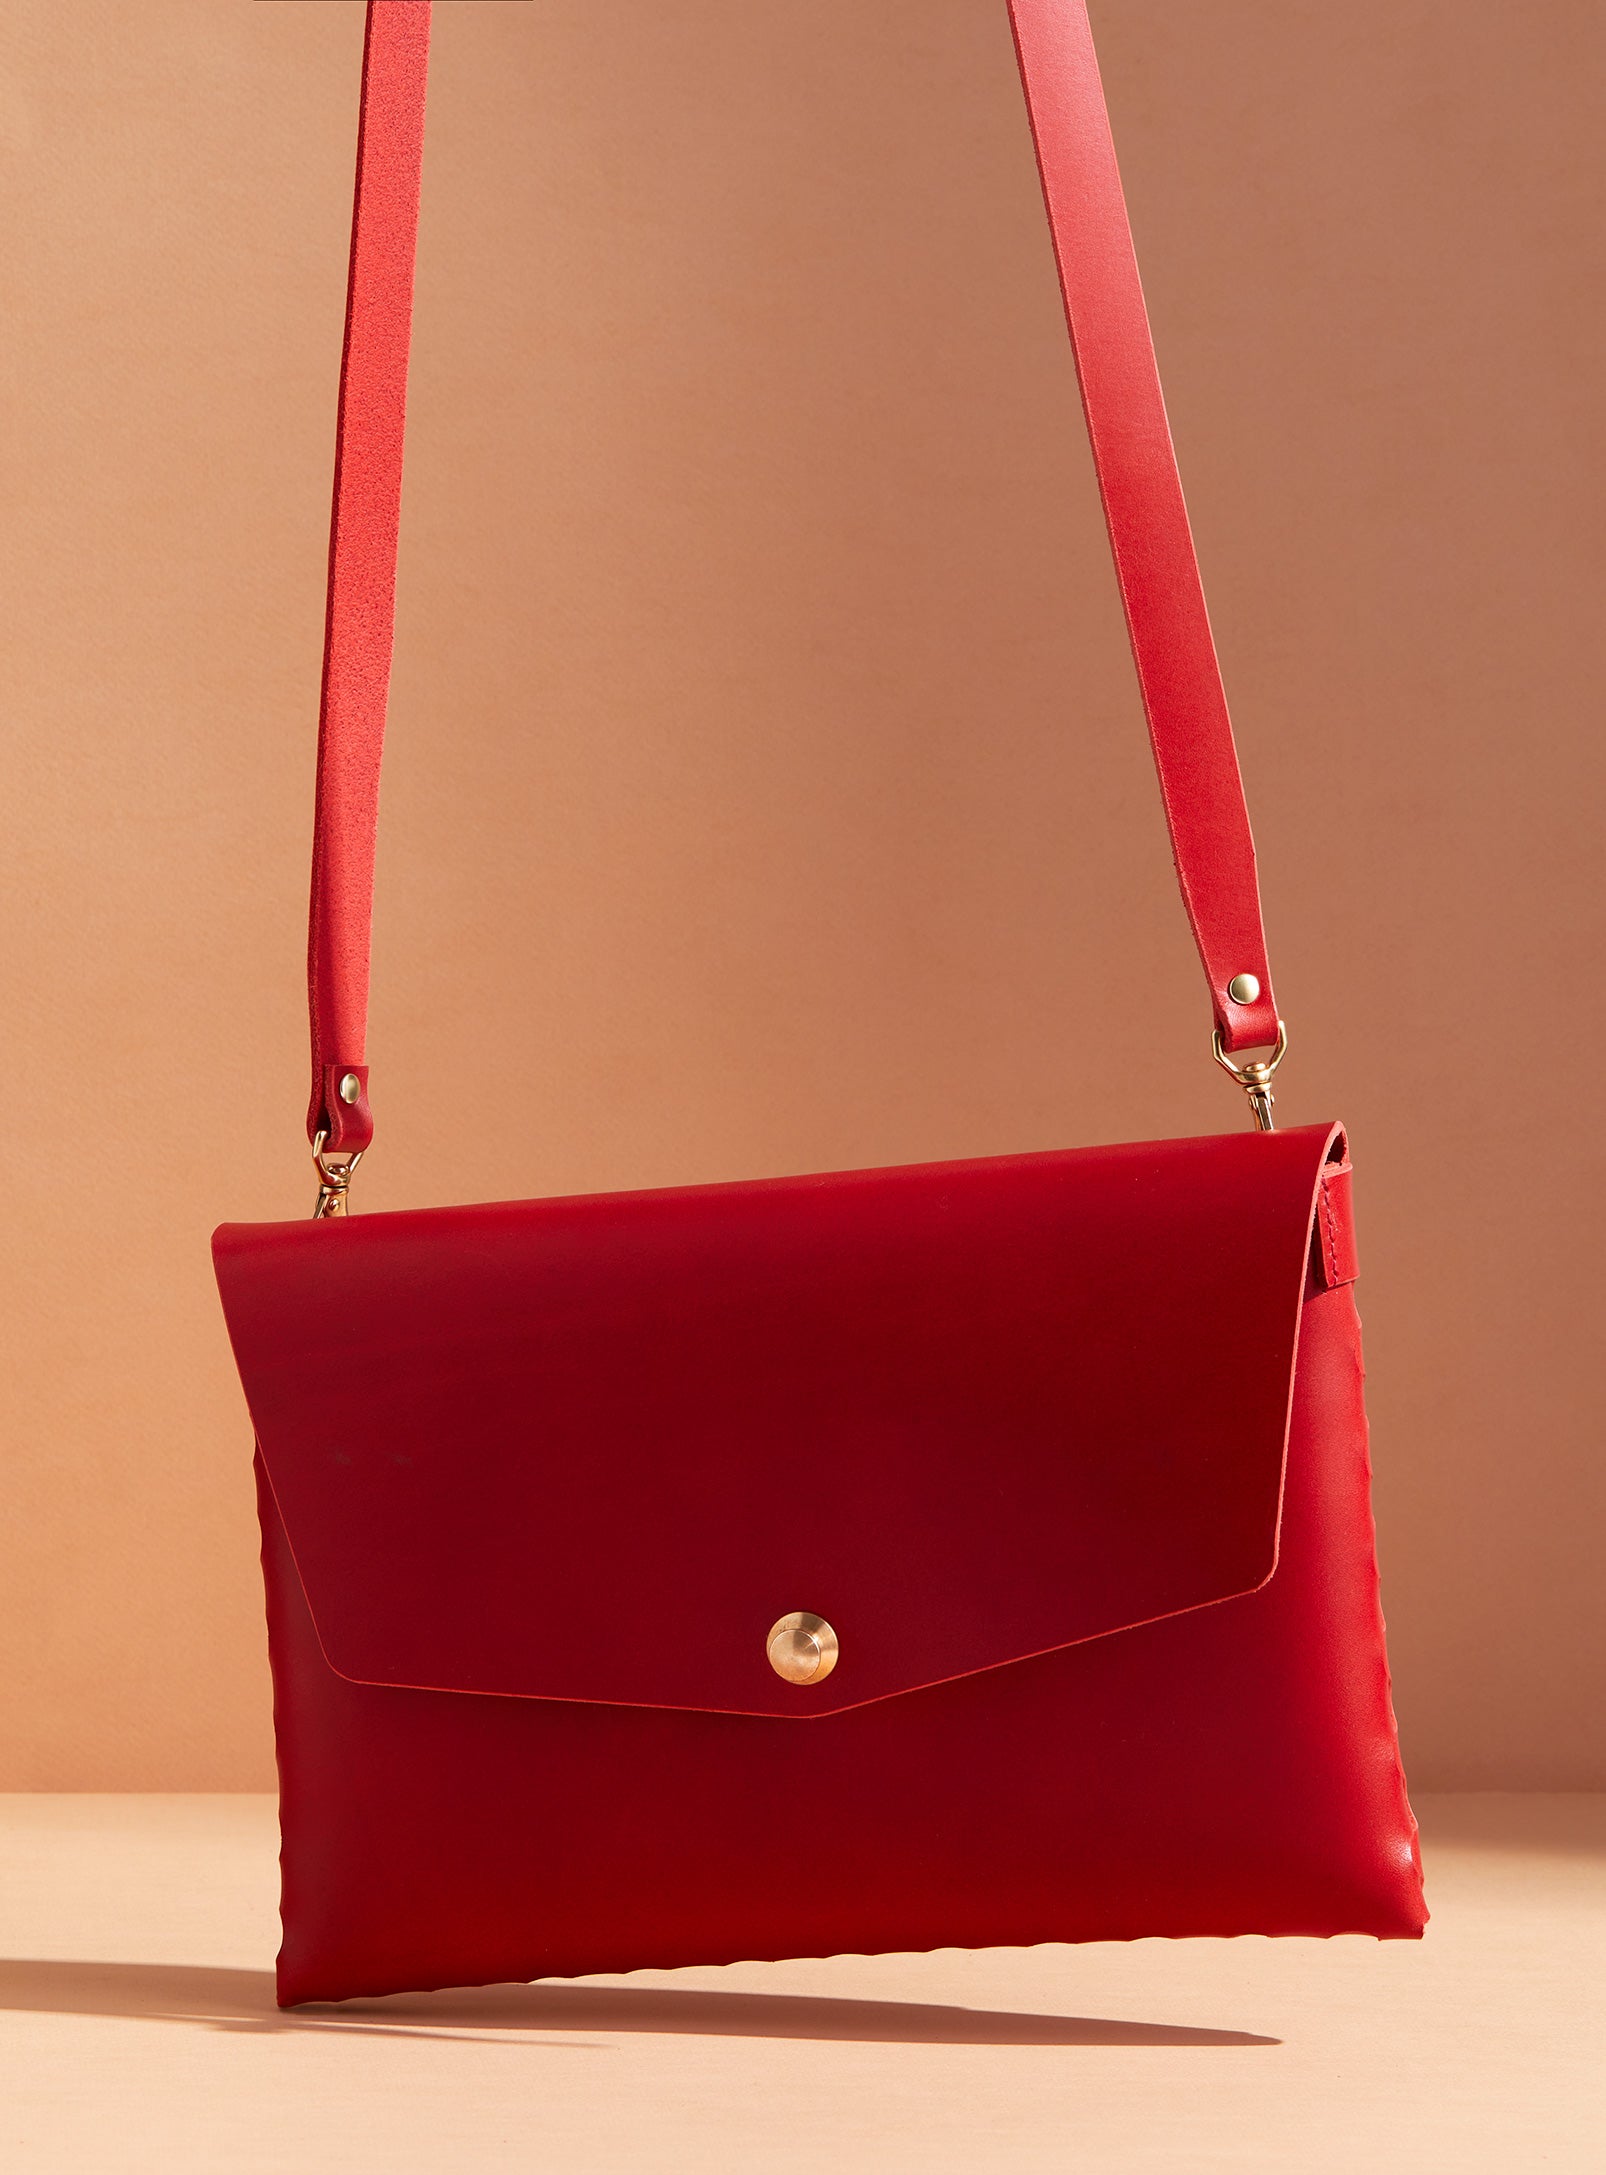 modjūl’s leather mini bag deluxe bag in red. A larger take on the classic mini bag, a rectangular-shaped bag with long detachable straps, handcrafted in Canada using quality Italian leather and brass hardware.